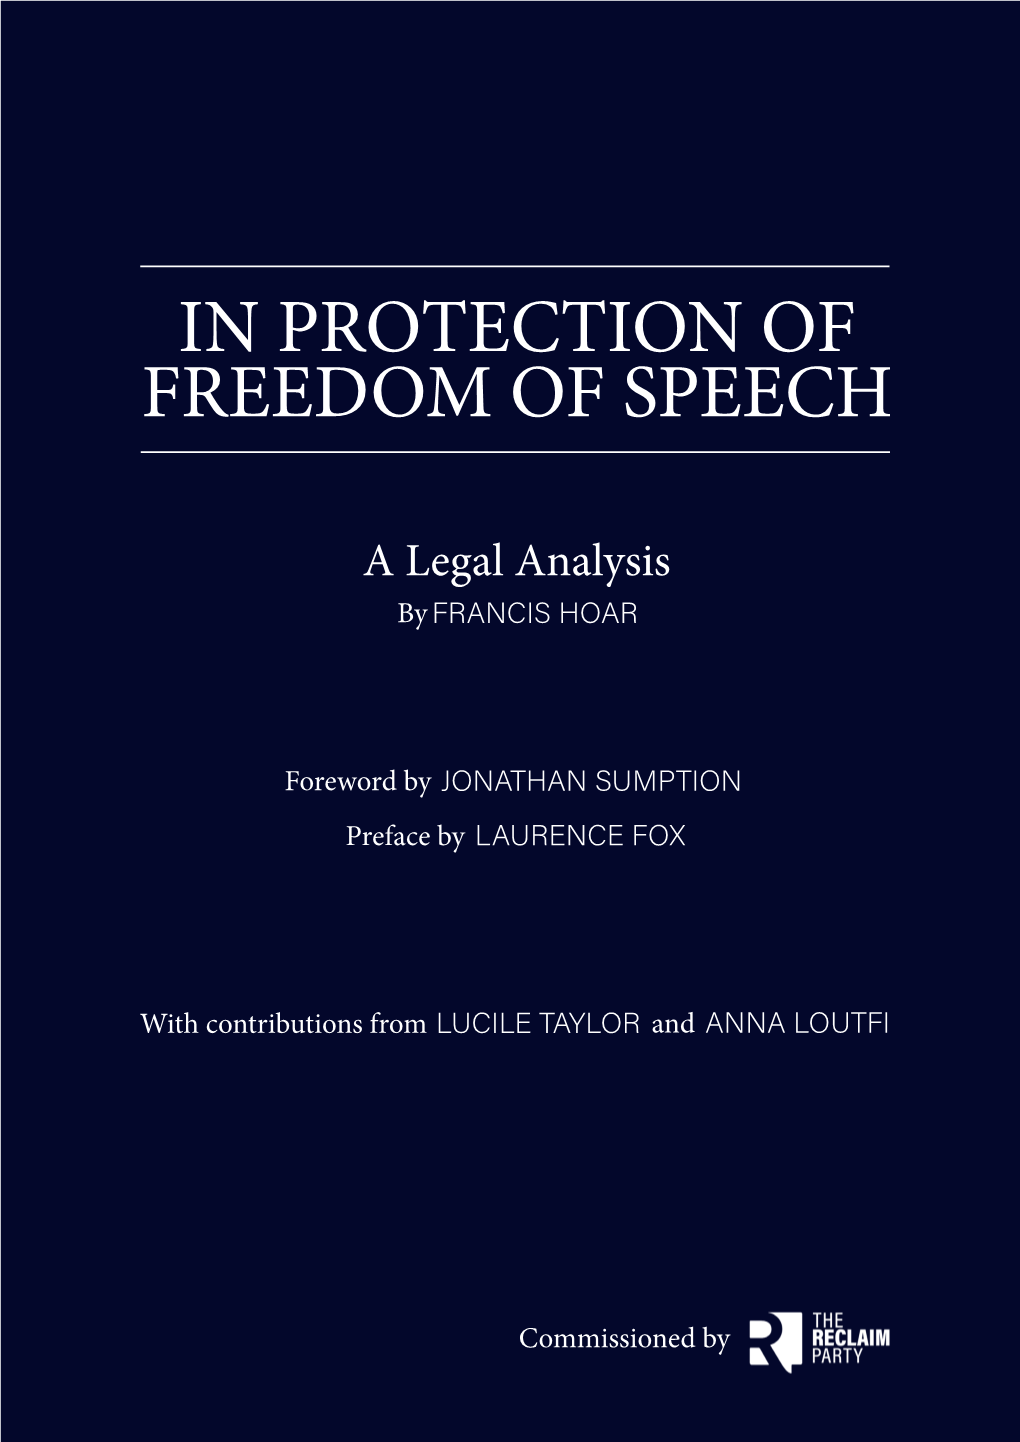 In Protection of Freedom of Speech